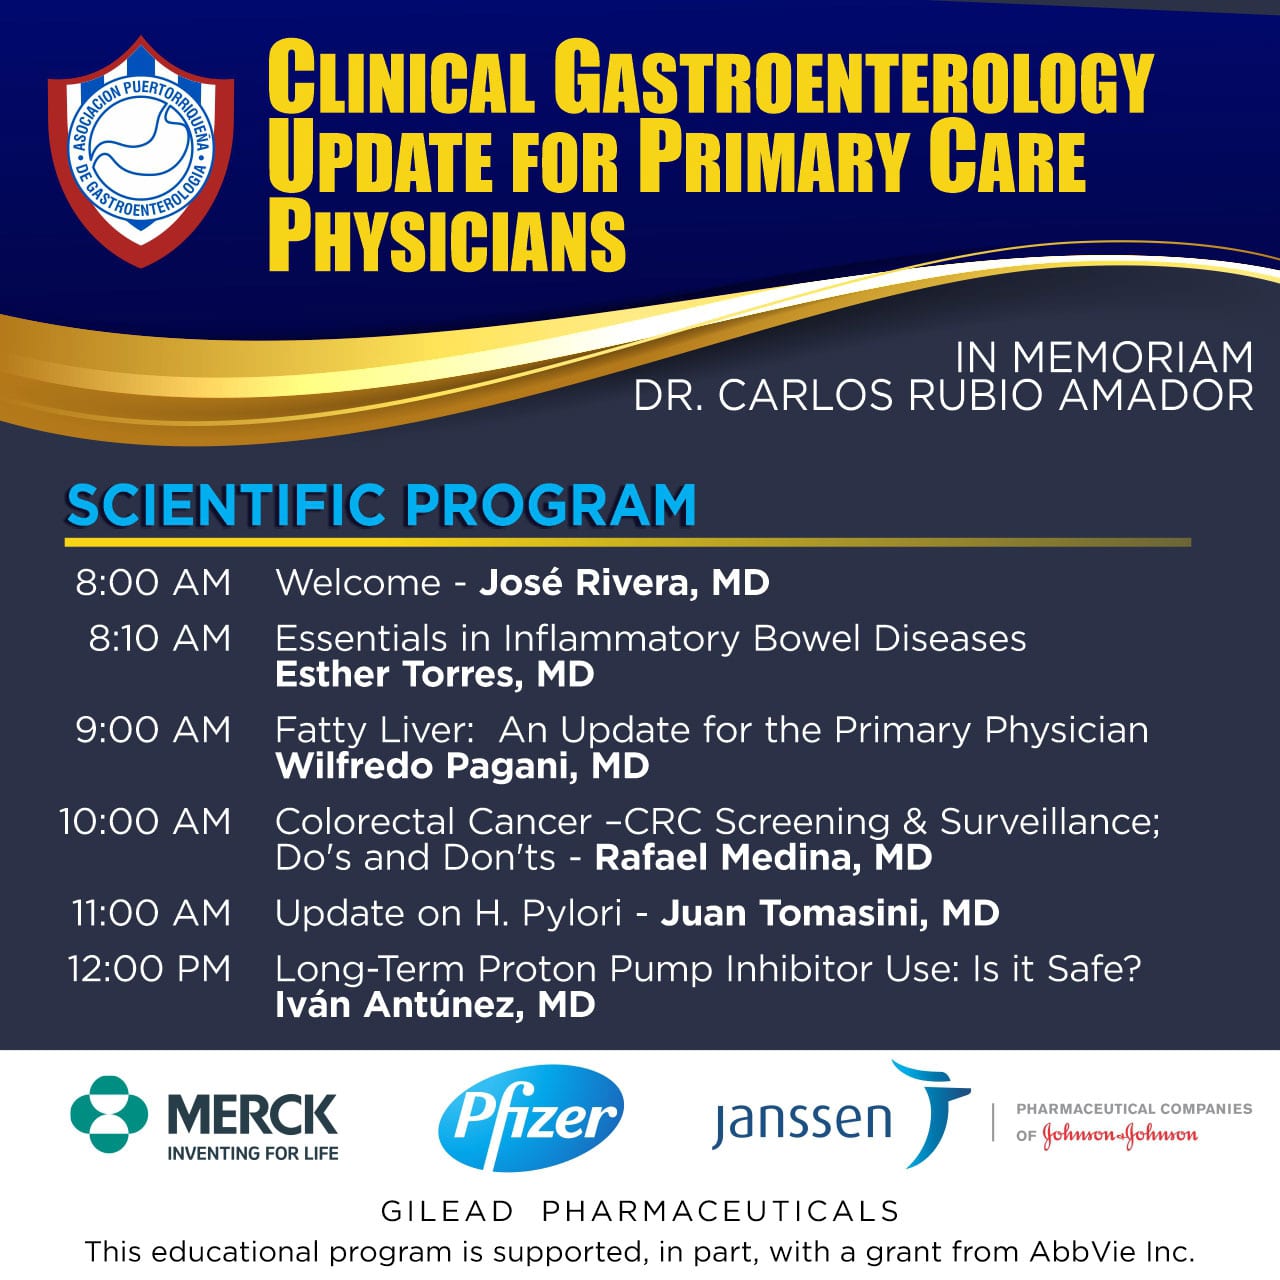 Clinical Gastroenterology Update for Primary Care Physicians